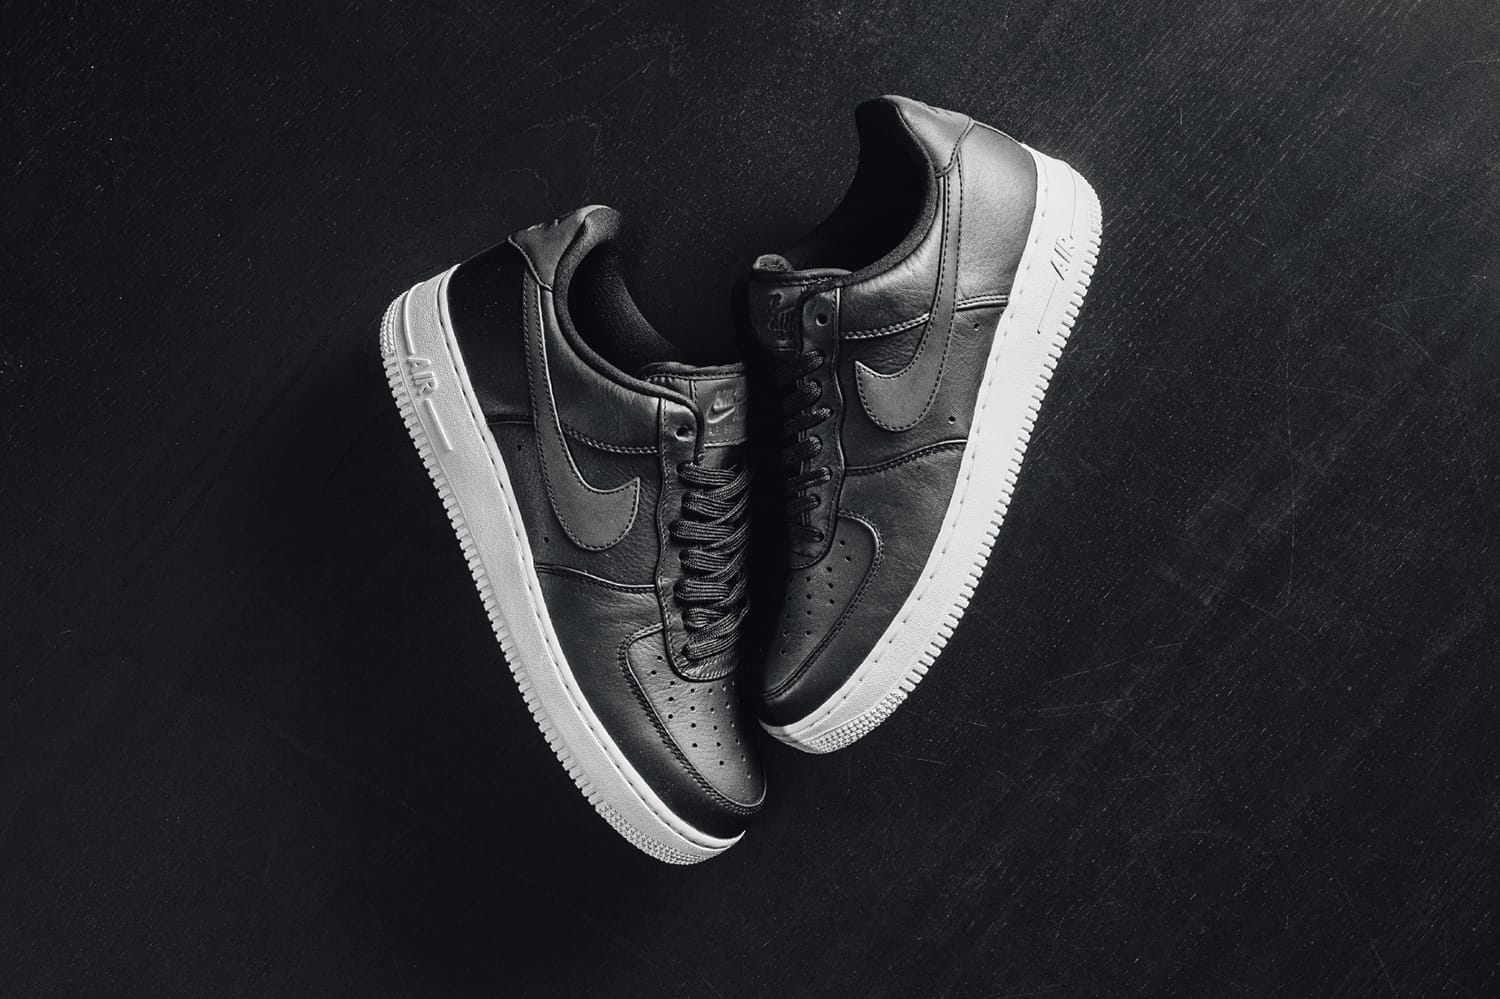 air force 107 black and white